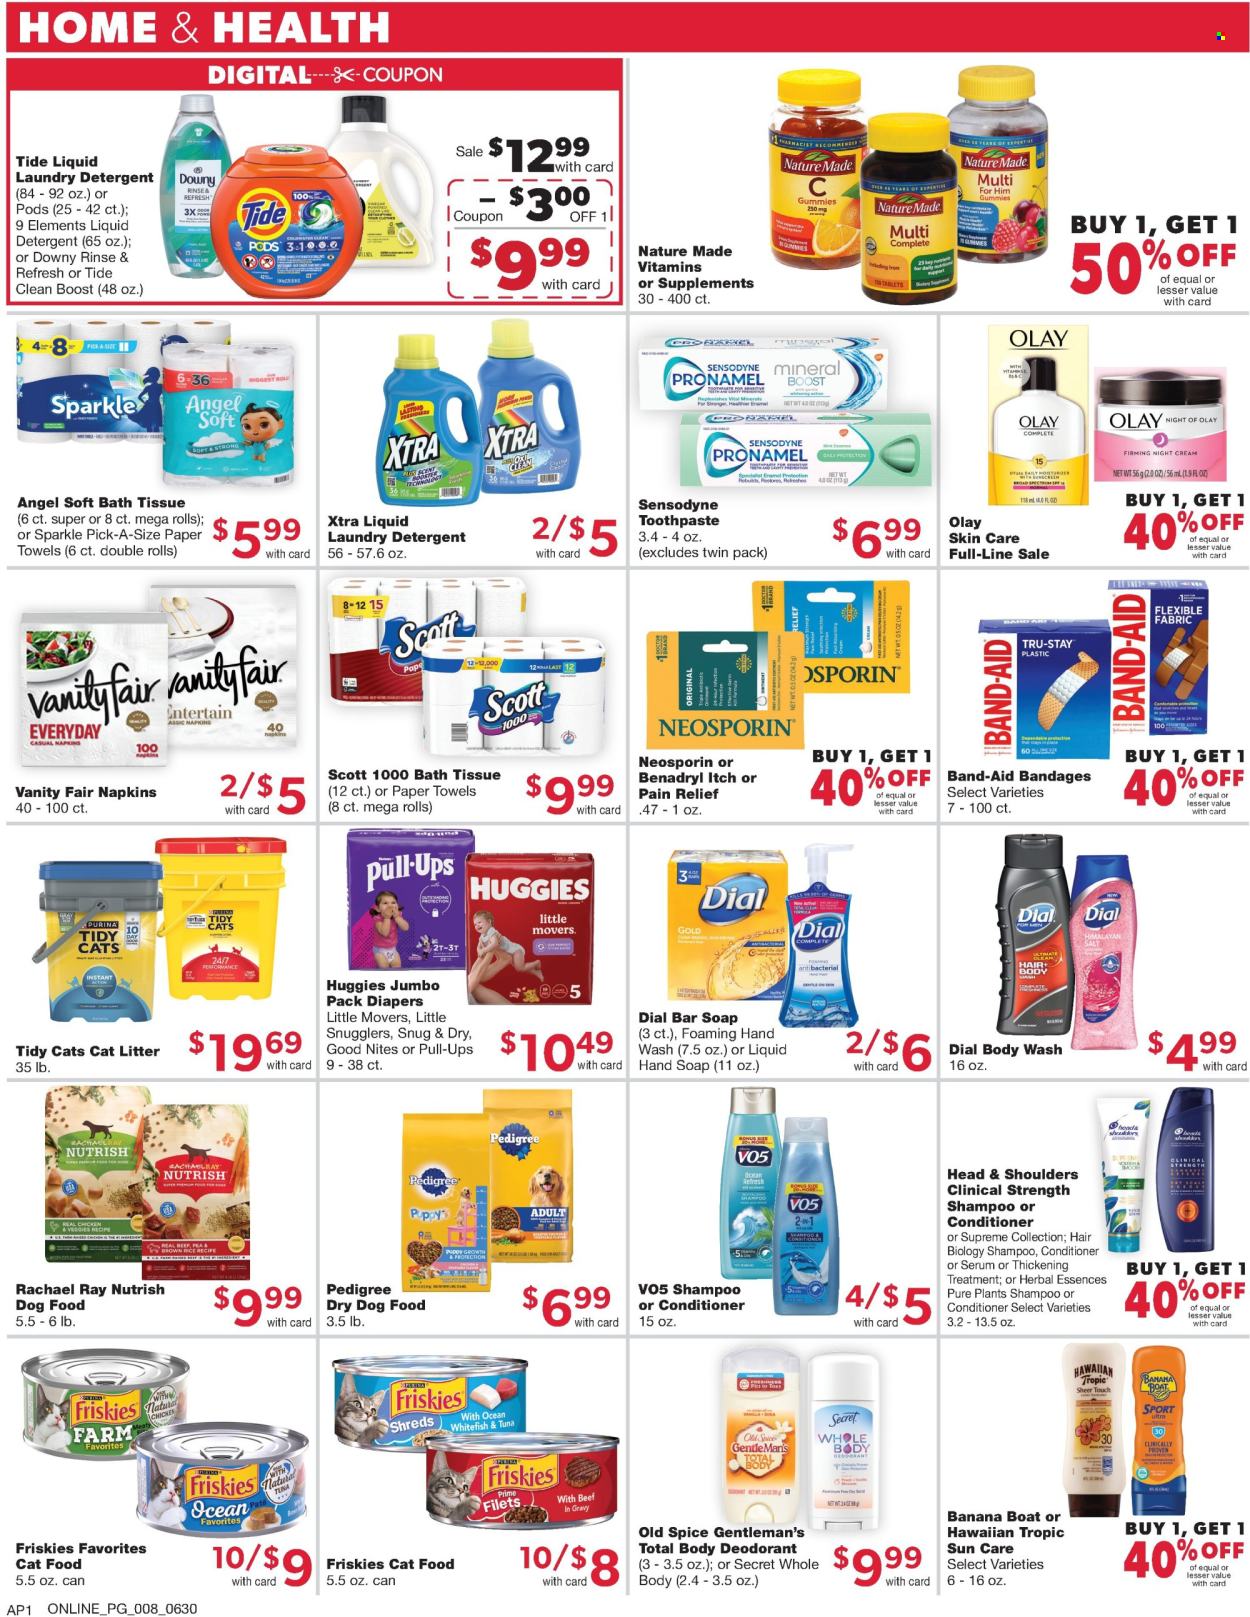 thumbnail - Family Fare Flyer - 06/30/2024 - 07/06/2024 - Sales products - salt, Huggies, napkins, nappies, bath tissue, Scott, kitchen towels, paper towels, detergent, Tide, fabric softener, liquid detergent, laundry detergent, XTRA, body wash, shampoo, hand soap, Old Spice, hand wash, soap bar, Dial, hair products, toothpaste, Sensodyne, moisturizer, serum, night cream, Olay, sun care, skin care product, conditioner, Head & Shoulders, Herbal Essences, VO5, sunscreen lotion, Hawaiian Tropic, deodorant, pain relief, Nature Made, Neosporin, dietary supplement, Benadryl, allergy control, vitamins, plaster. Page 13.